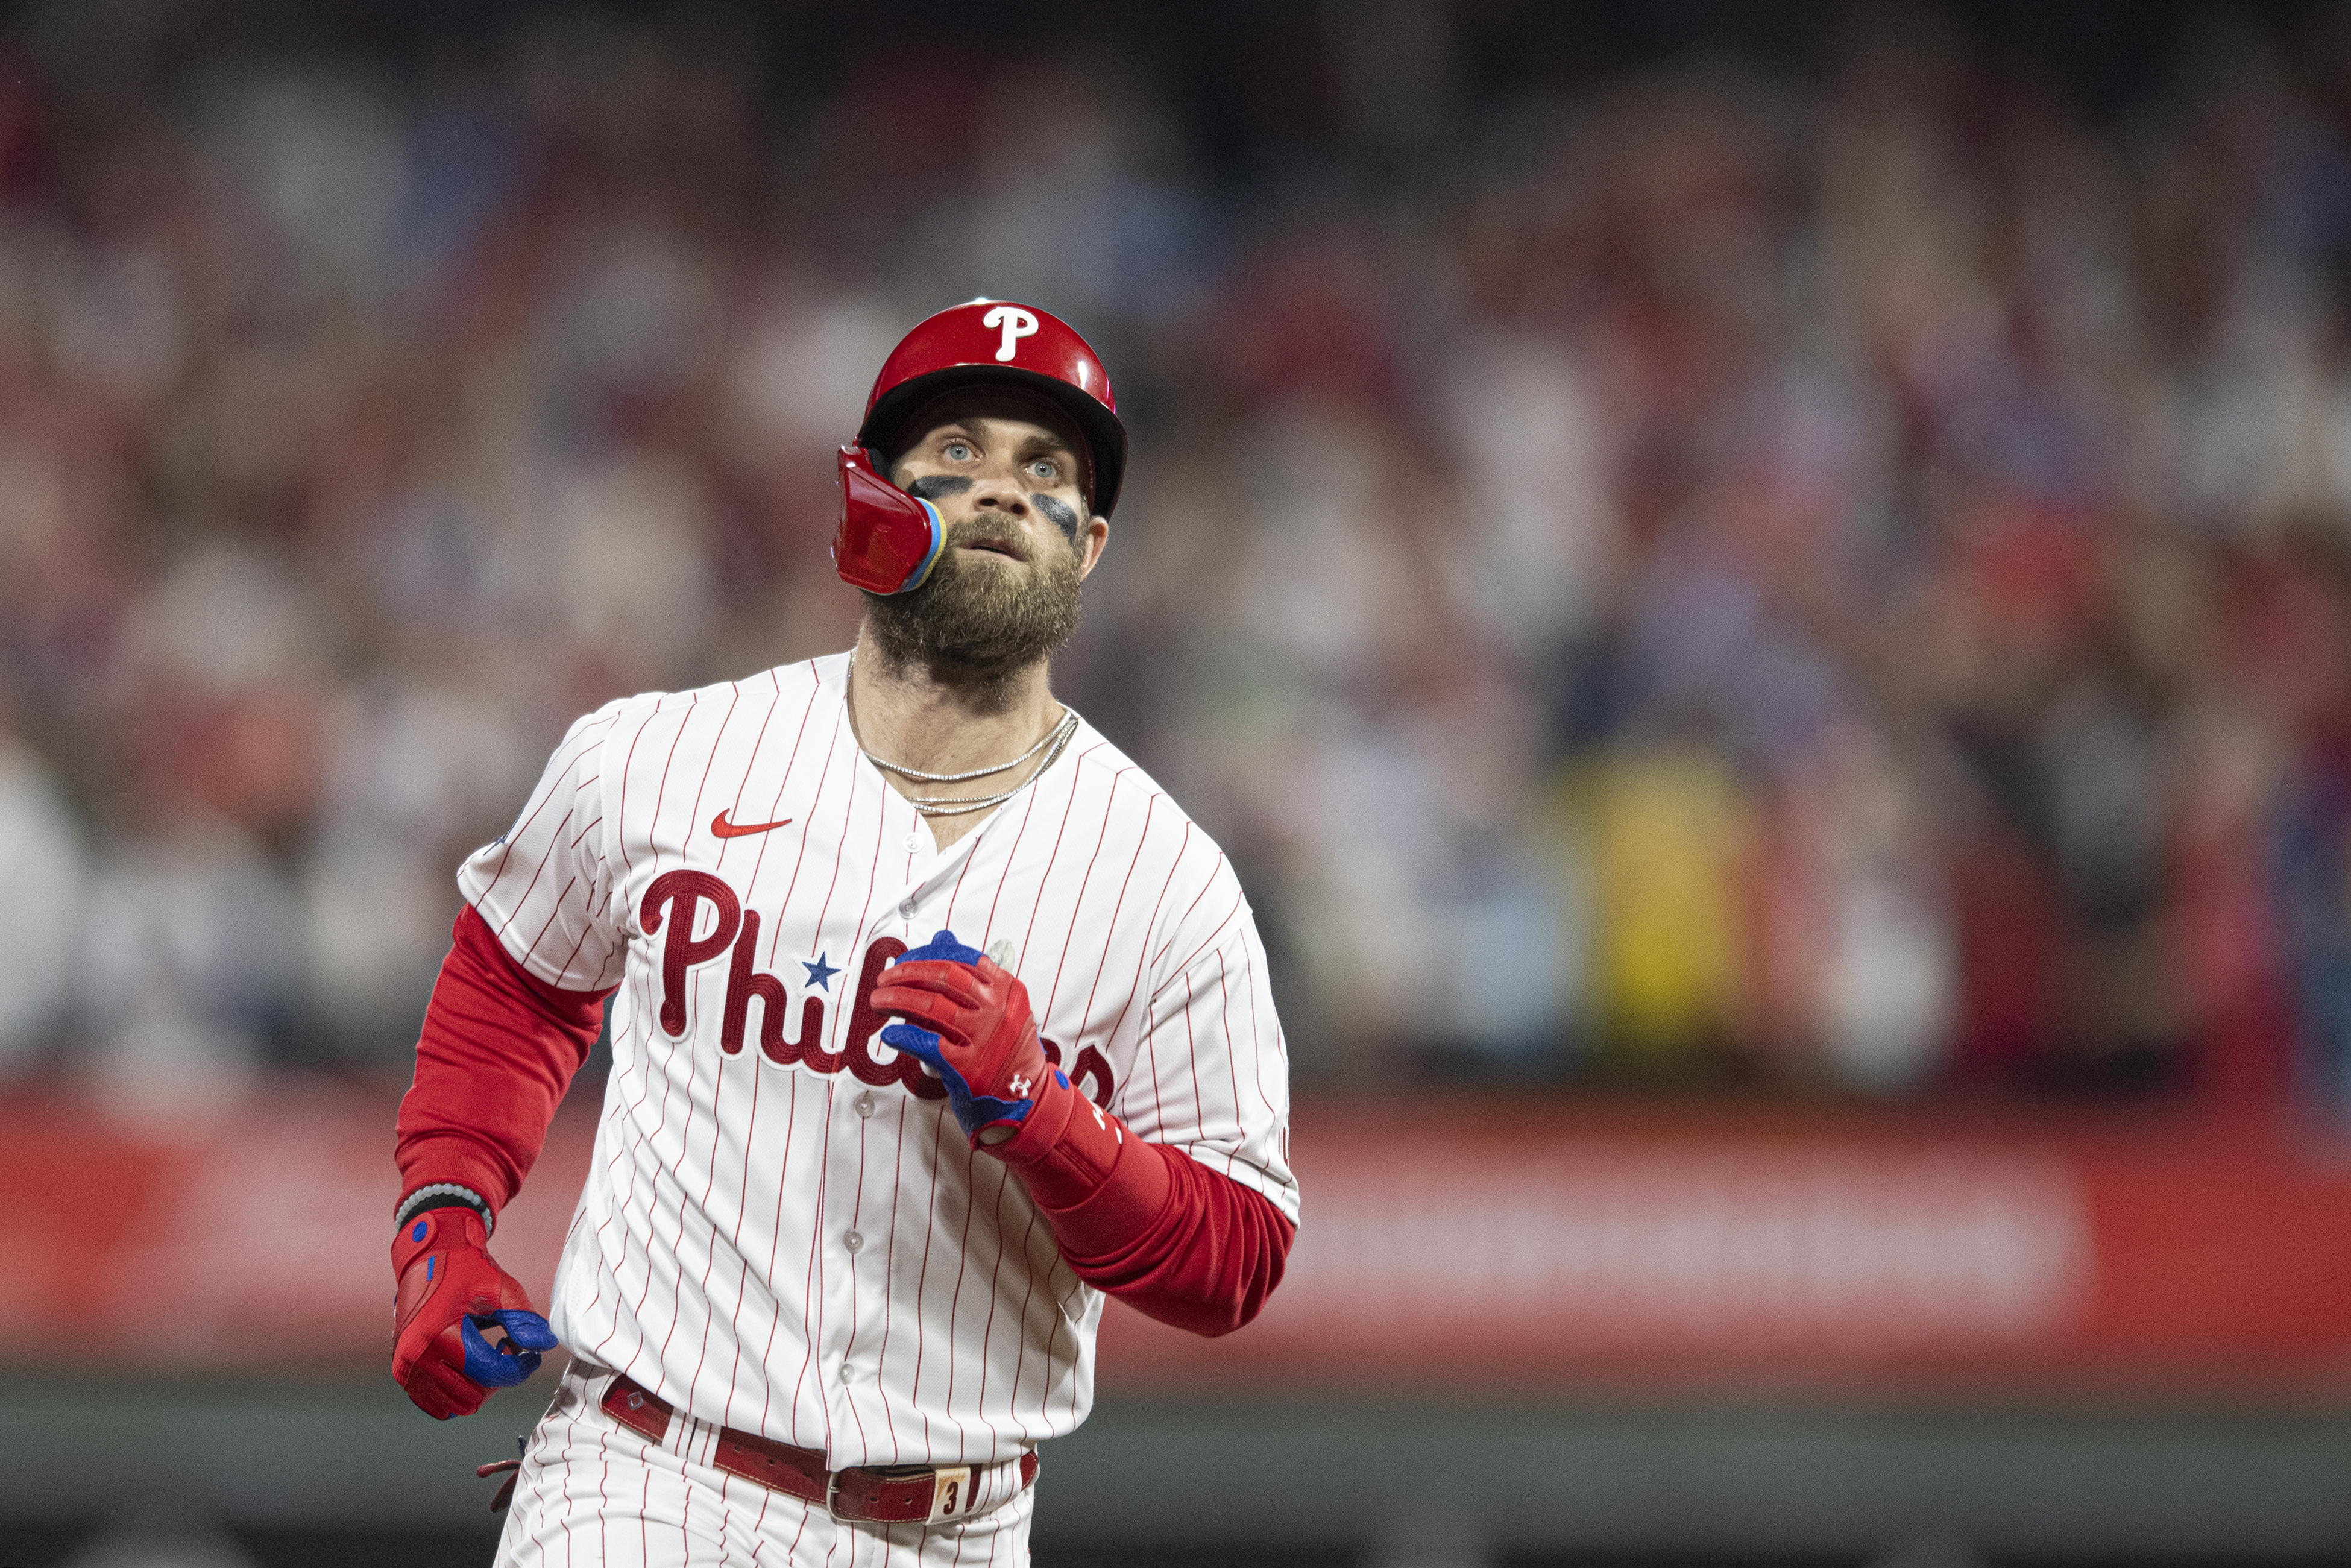 Game 3 Phillies-Astros highlights, score, next game, World Series